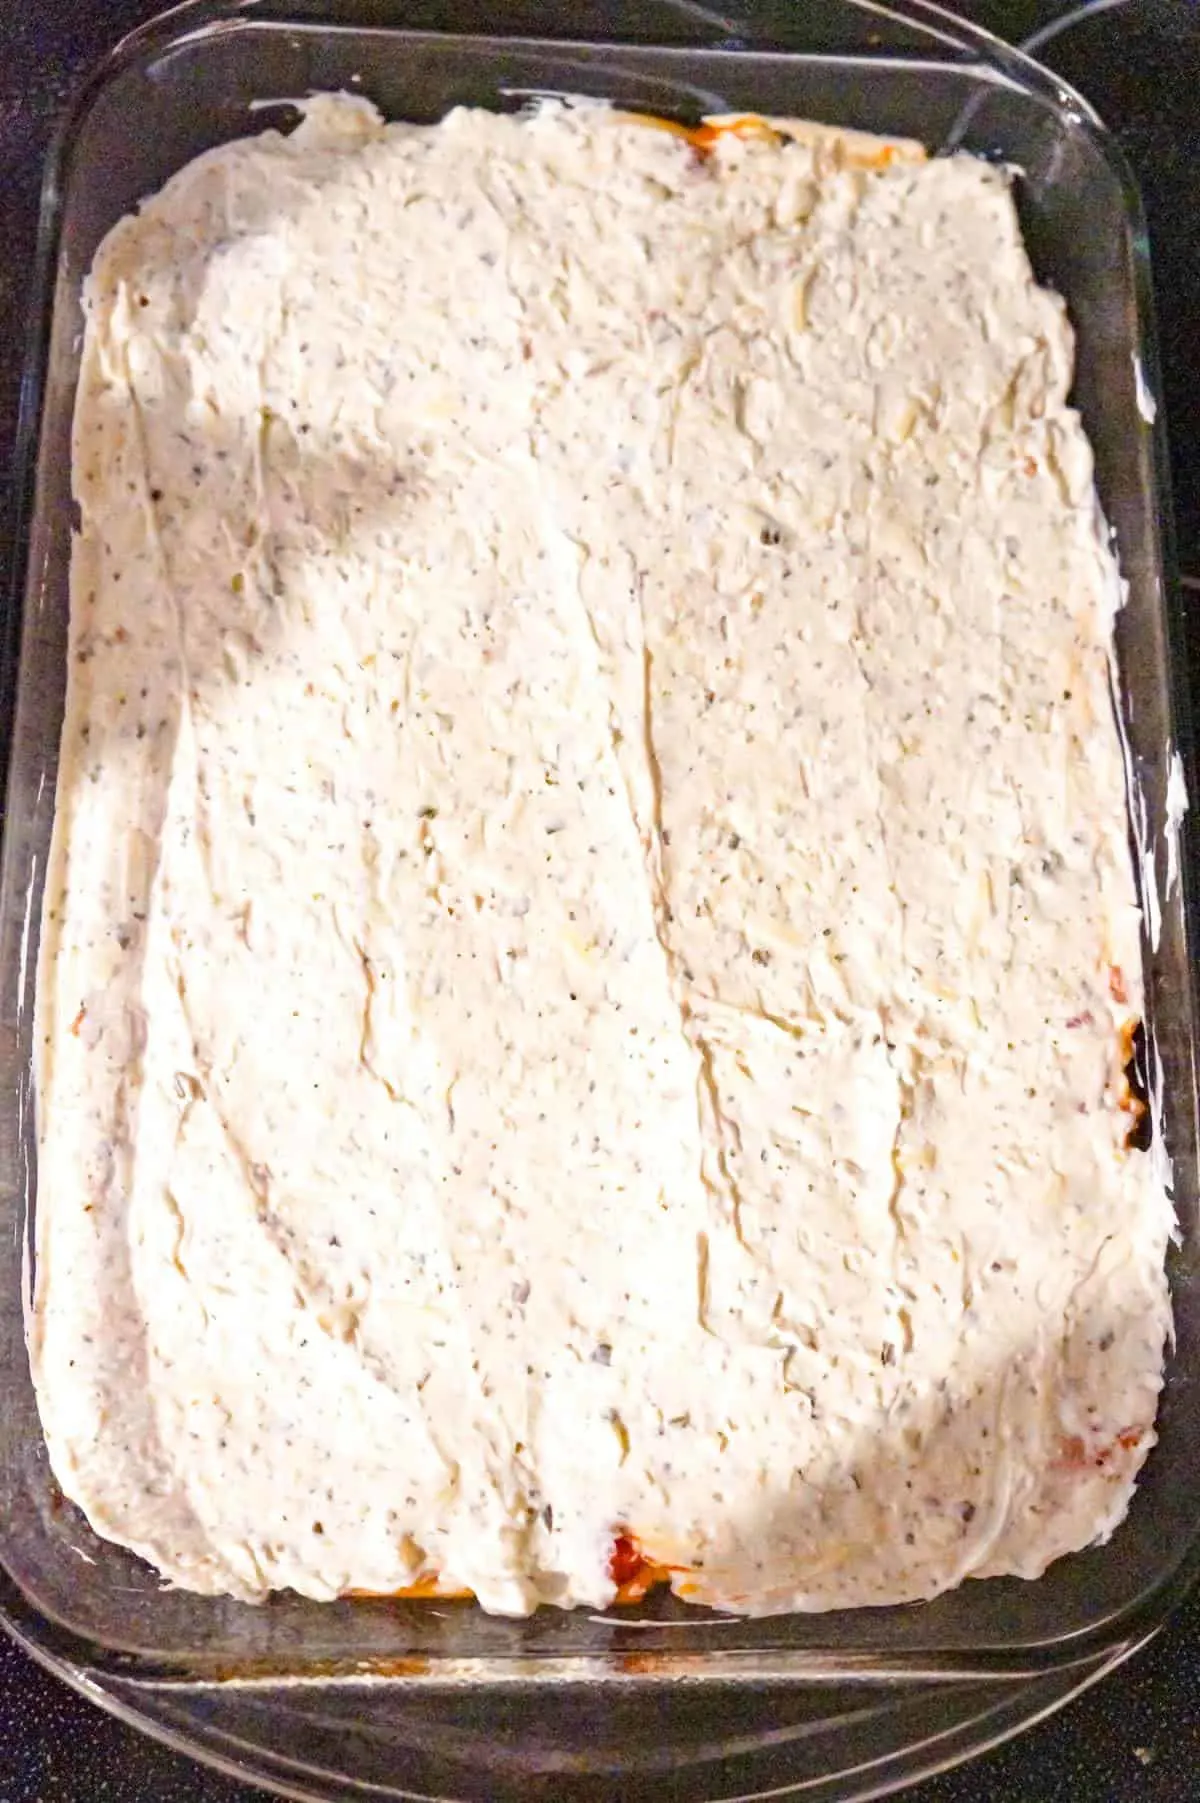 cream cheese and sour cream mixture on top of spaghetti in a baking dish